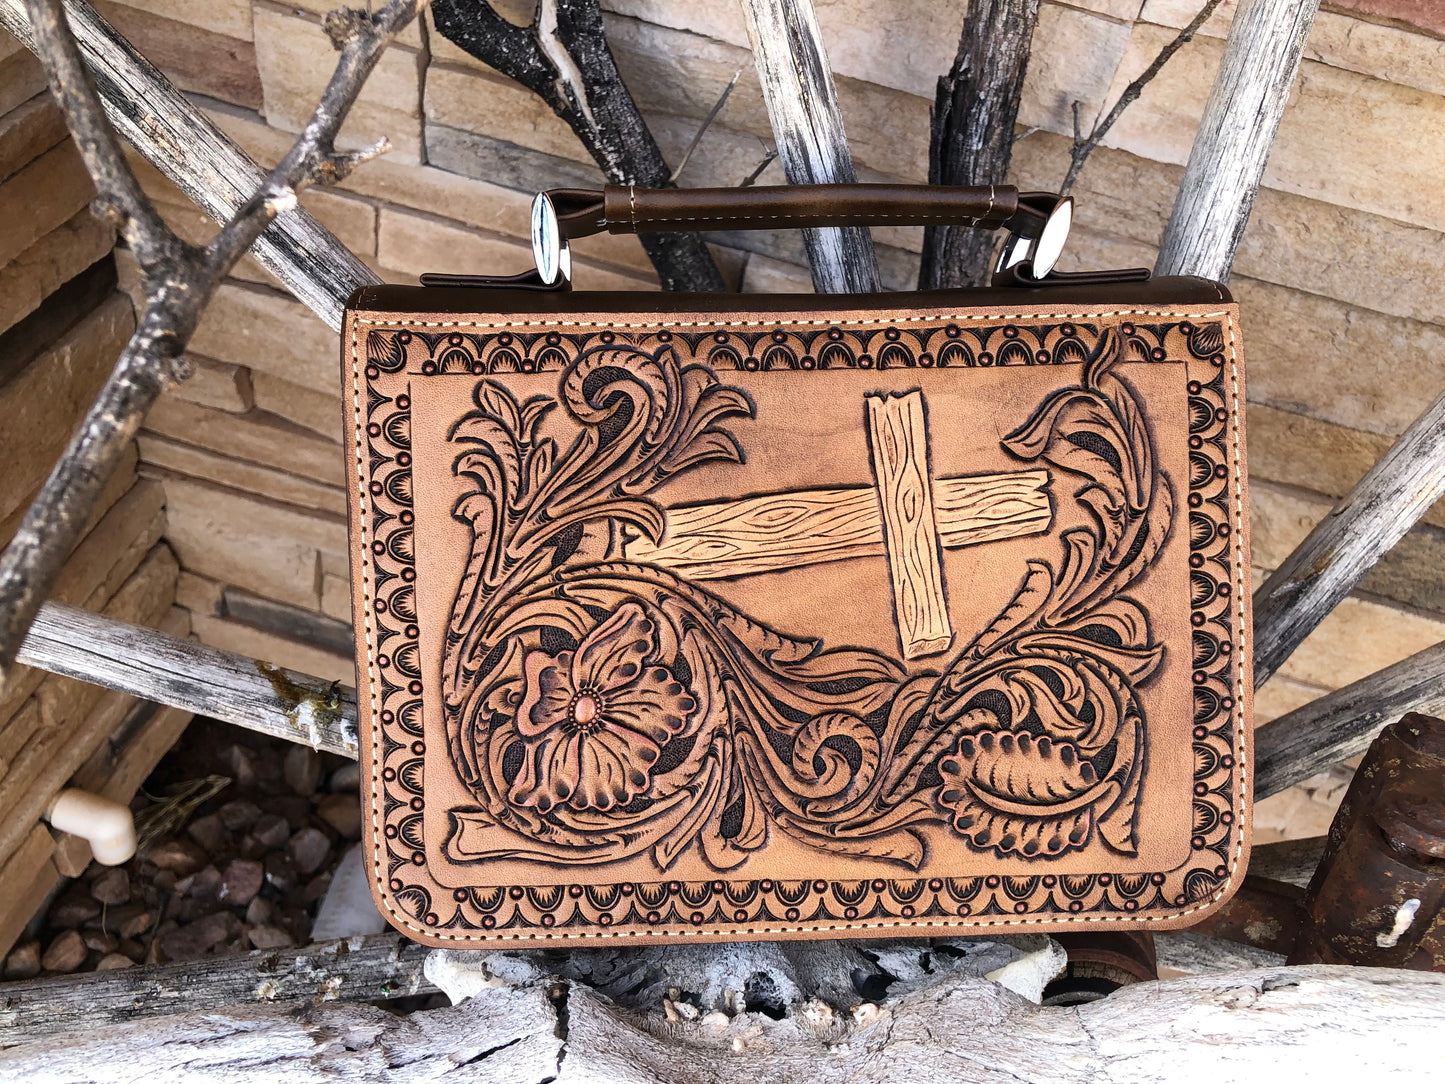 Western tooled leather wooden cross and floral bible cover